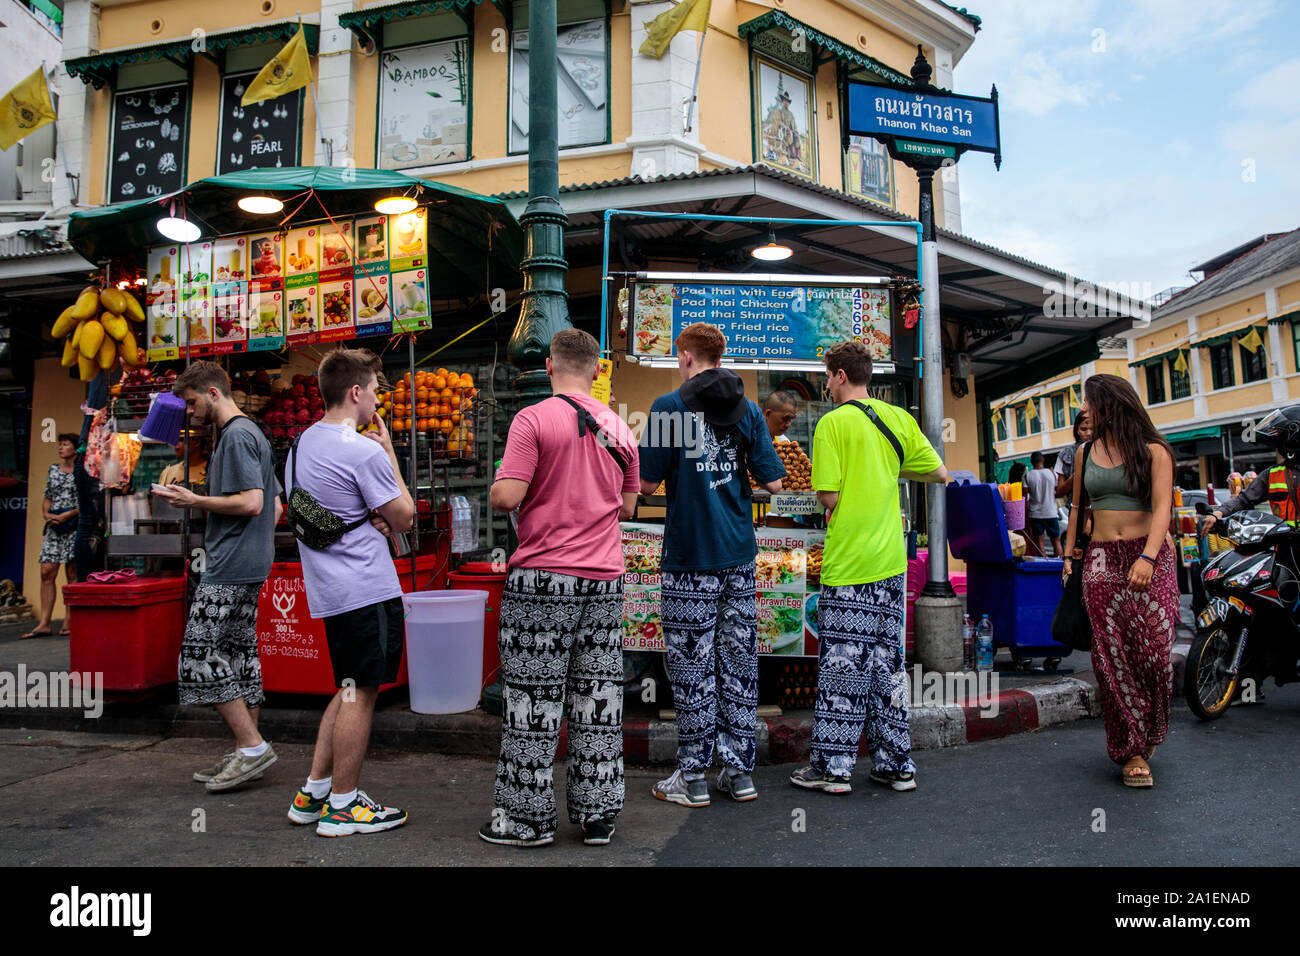 BANGKOK, THAILAND: Tourists wearing elephant-adorned trousers grab food at a stall on Khao San Road in Bangkok, Thailand on August 22nd, 2019. Bangkok's bustling Khao San Road - a strip famous among tourists for its budget hostels, street food and market stalls - is set for a £1.28M face lift in October this year.   For many backpackers Khao San is the starting point for their travels across Southeast Asia. It is a place to meet fellow travellers, dine out on pad thai served from street carts, sip cocktails from small brightly-coloured buckets or perhaps get an ill-advised tattoo.   A place bo Stock Photo